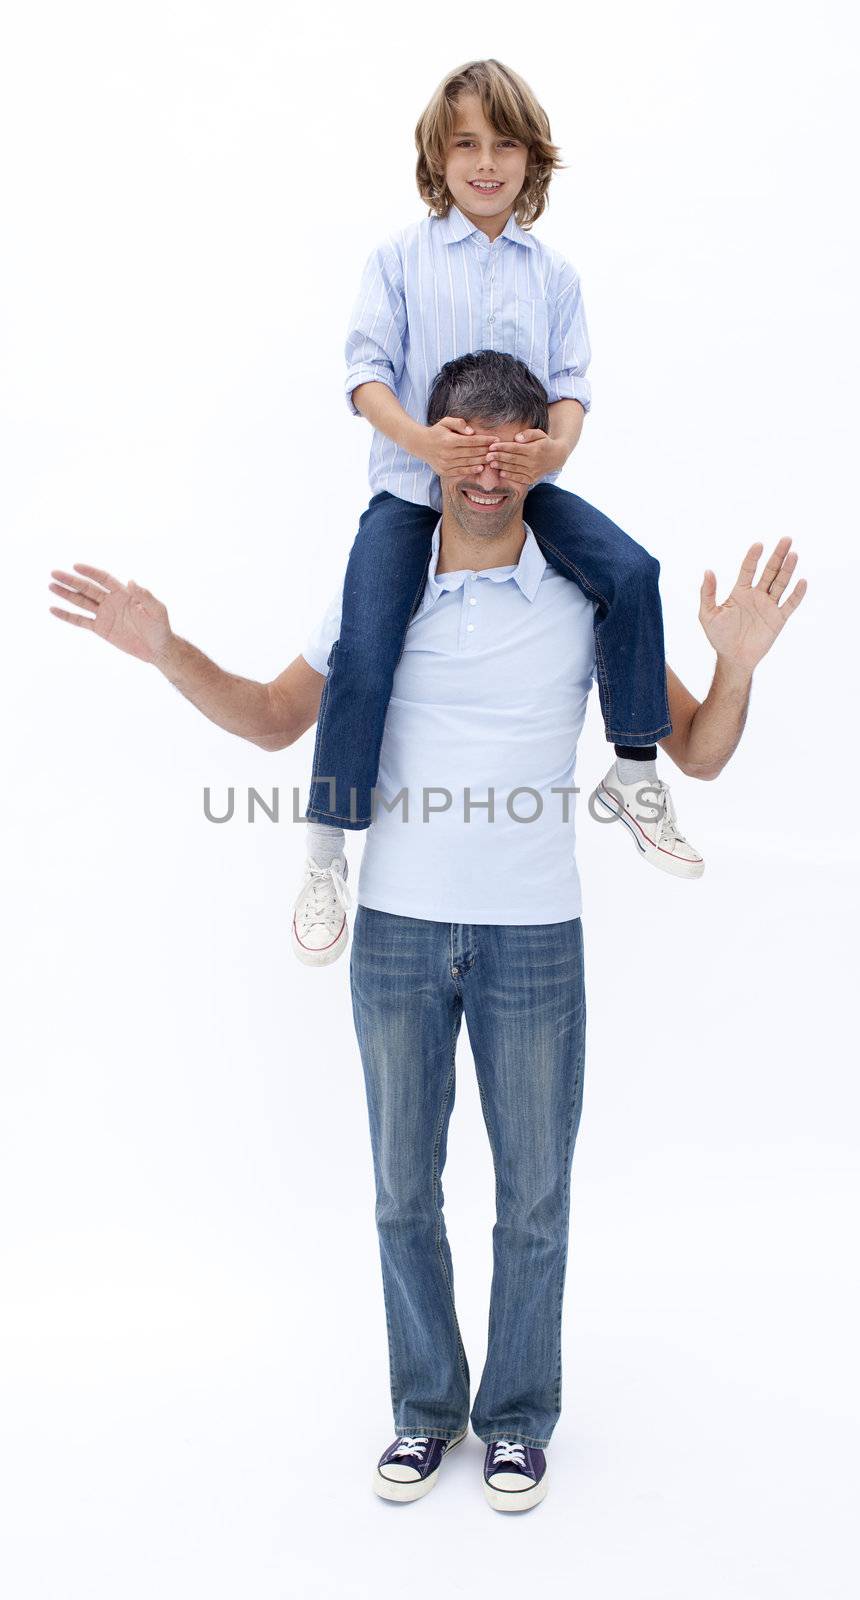 Father giving little boy piggy back ride with eyes closed against white background